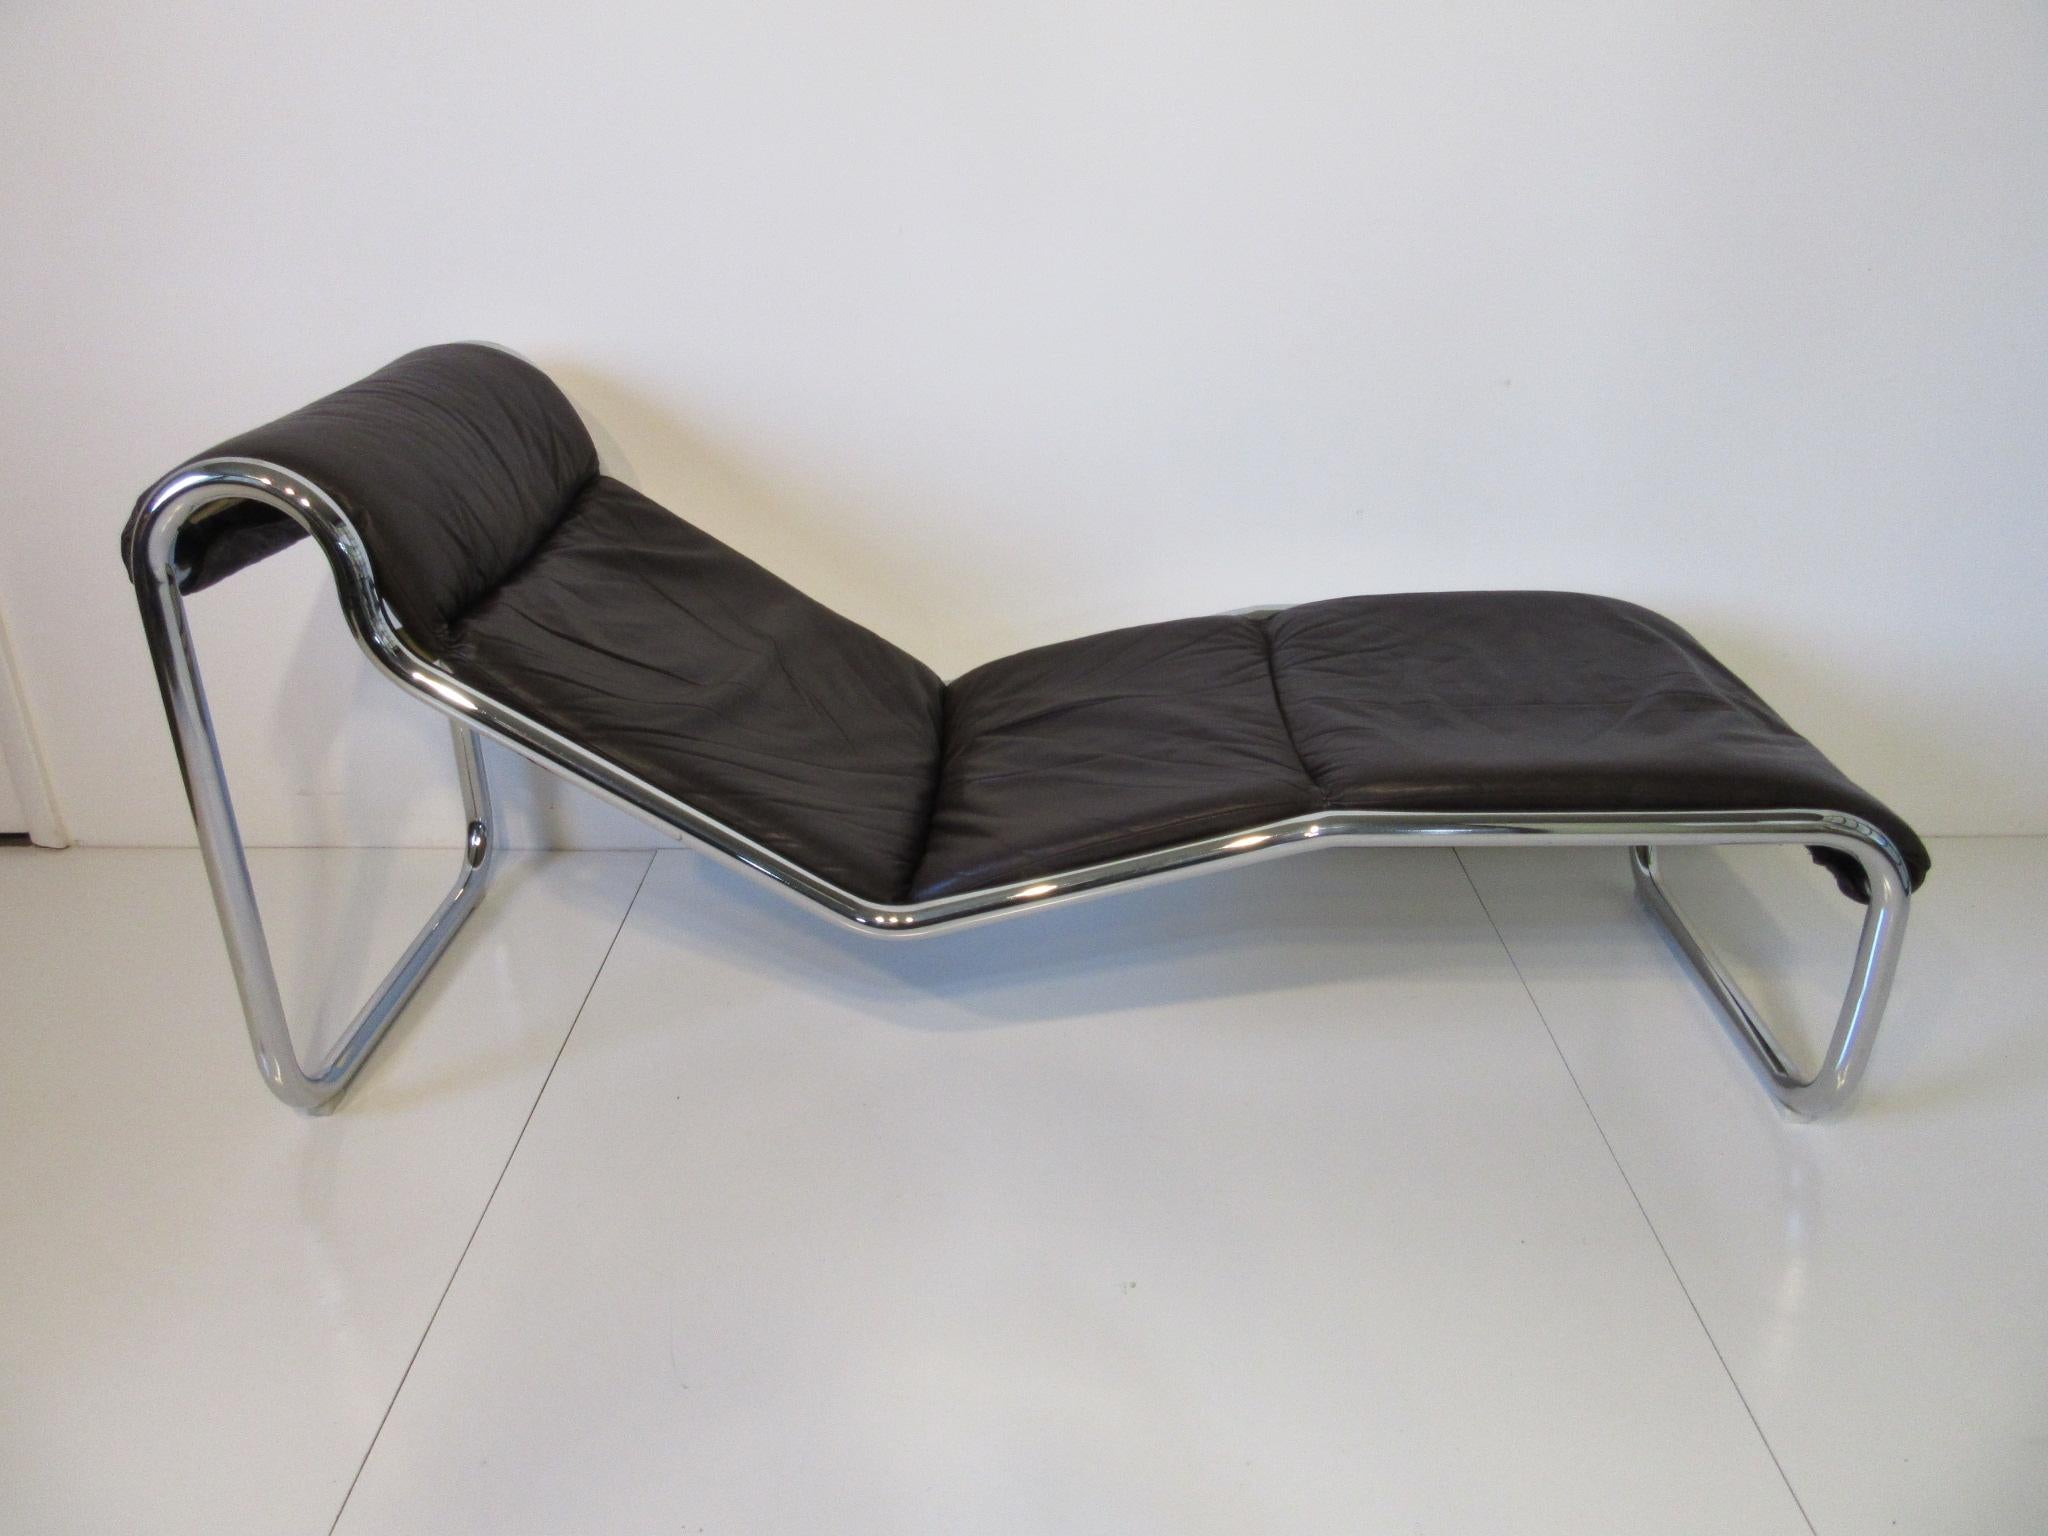 A sleek, stylish Italian chaise lounger - daybed with sculptural chrome tube frame covered in soft and rich brown leather, nylon glides to the bottom will protect your floors. This is the most comfortable lounger will have ever had, ergonomic